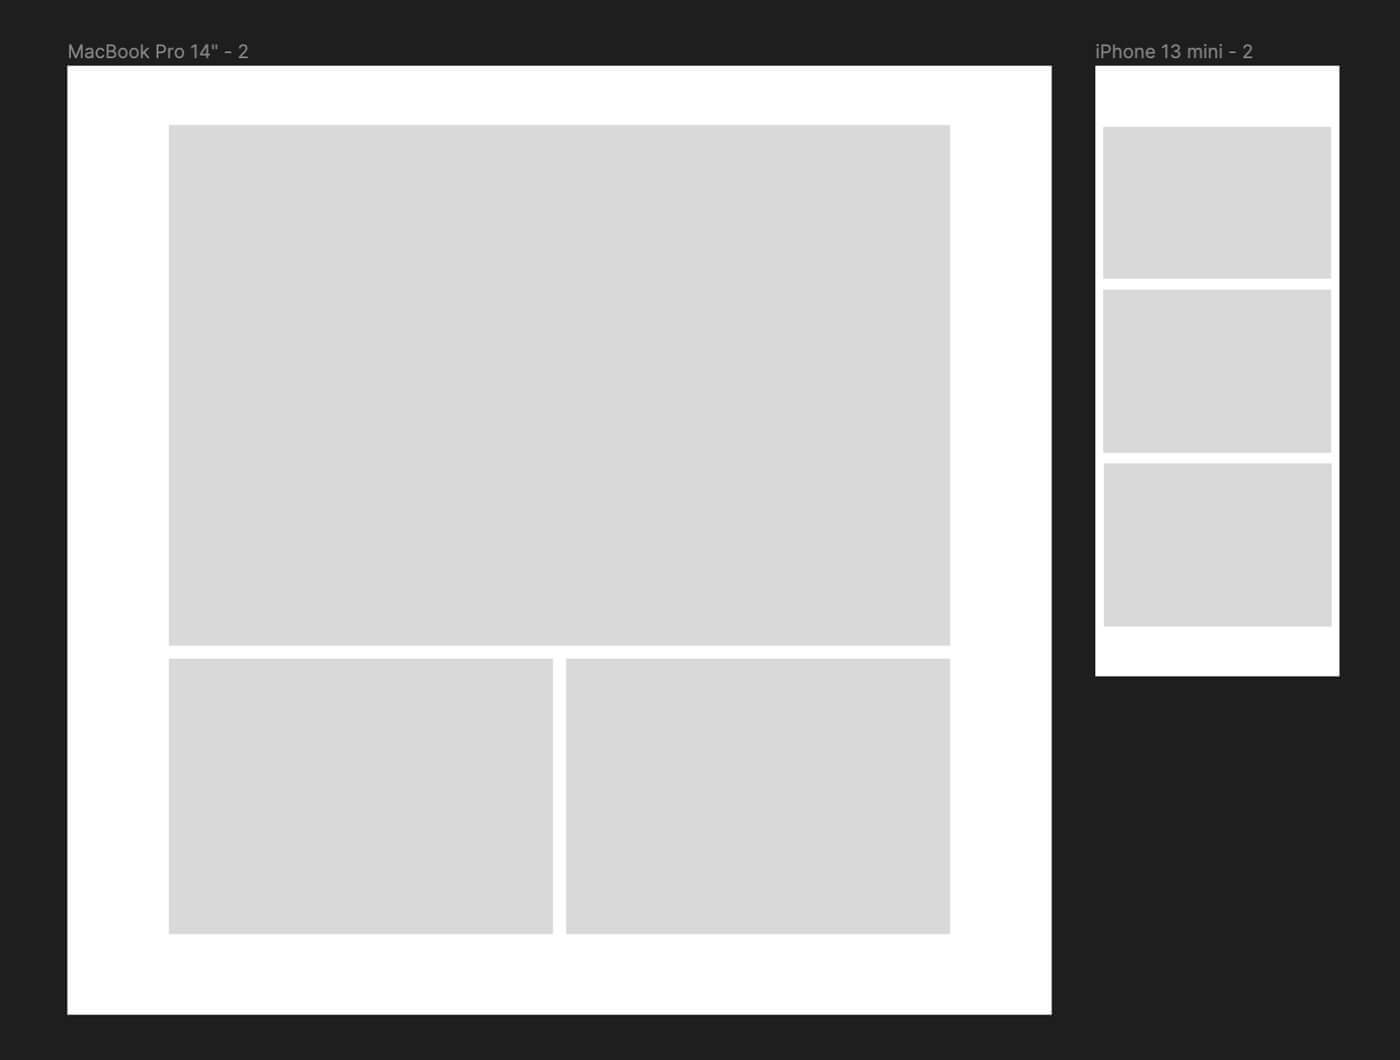 3-panel comic, depicted as simple boxes, on desktop and mobile. On desktop, panel 1 is a large landscape panel, and panels 2 and 3 fill the next row in two columns, each about a quarter the size of the first panel. On mobile, all three panels are stacked in a single-column, and while they maintain the same proportions as on desktop, they are all the same size.